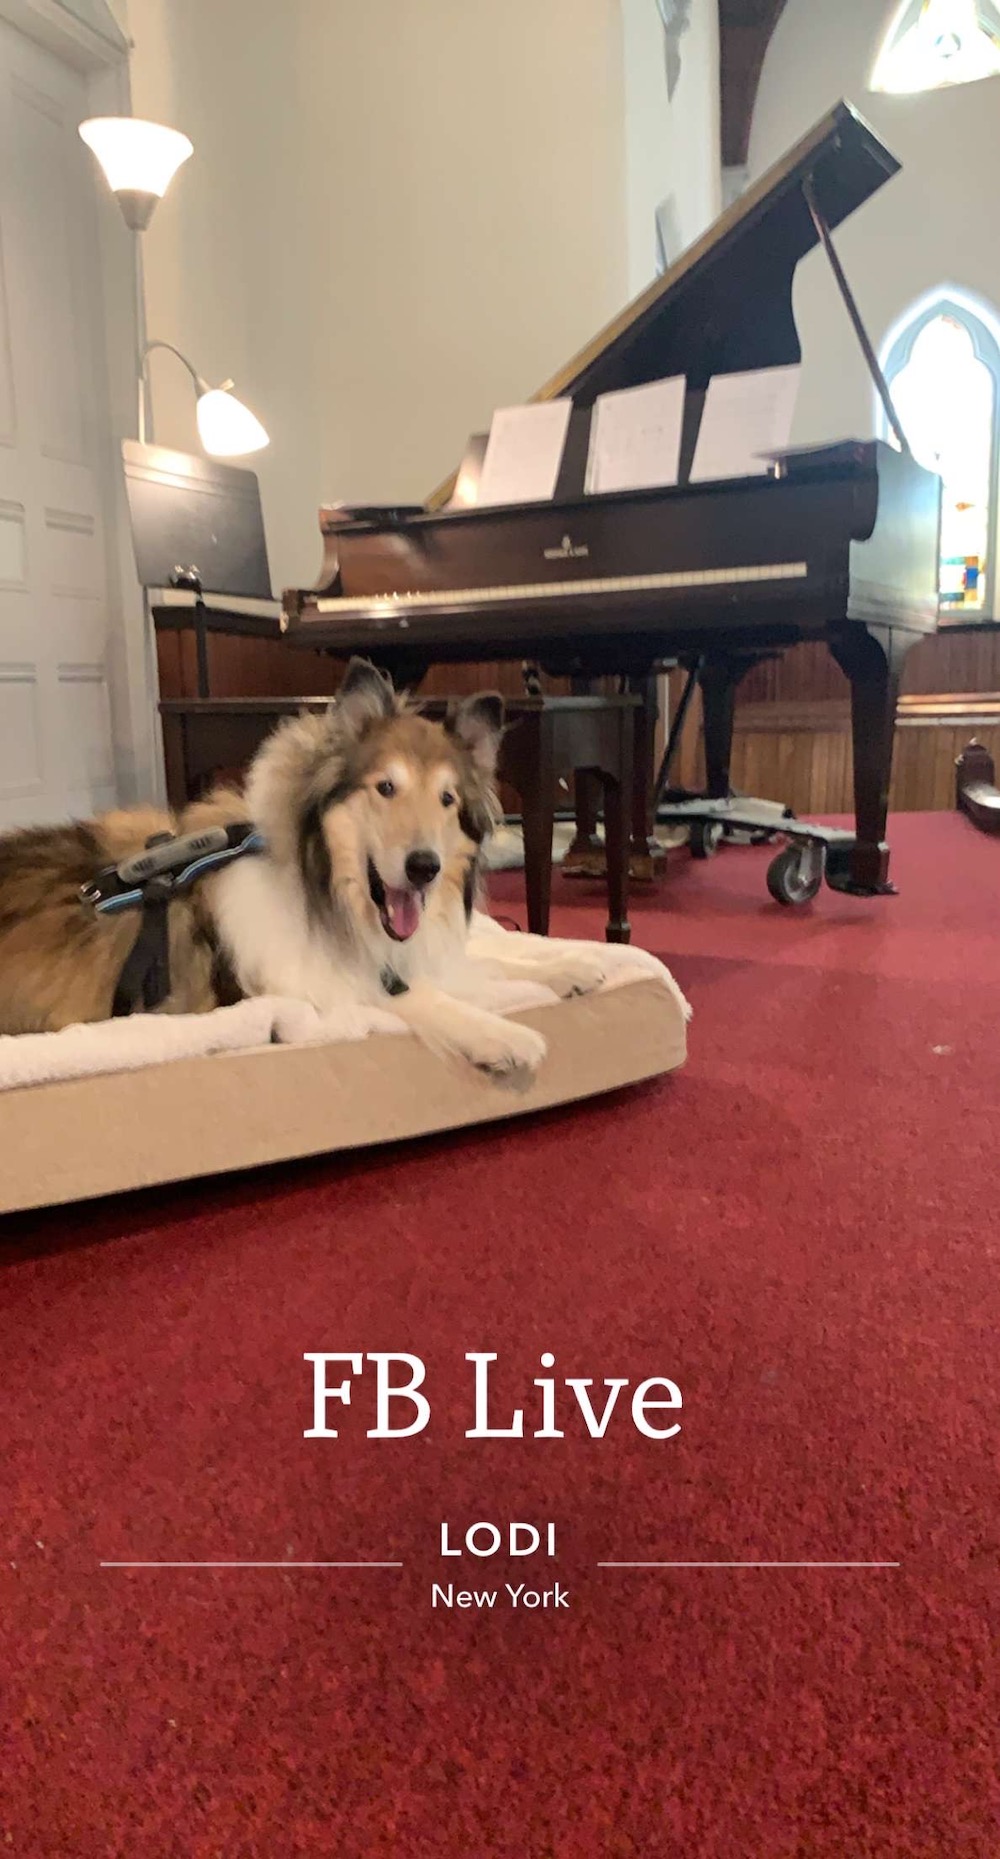 An ad for a Facebook Live event with a collie seated on a dog bed in a church with a piano behind him